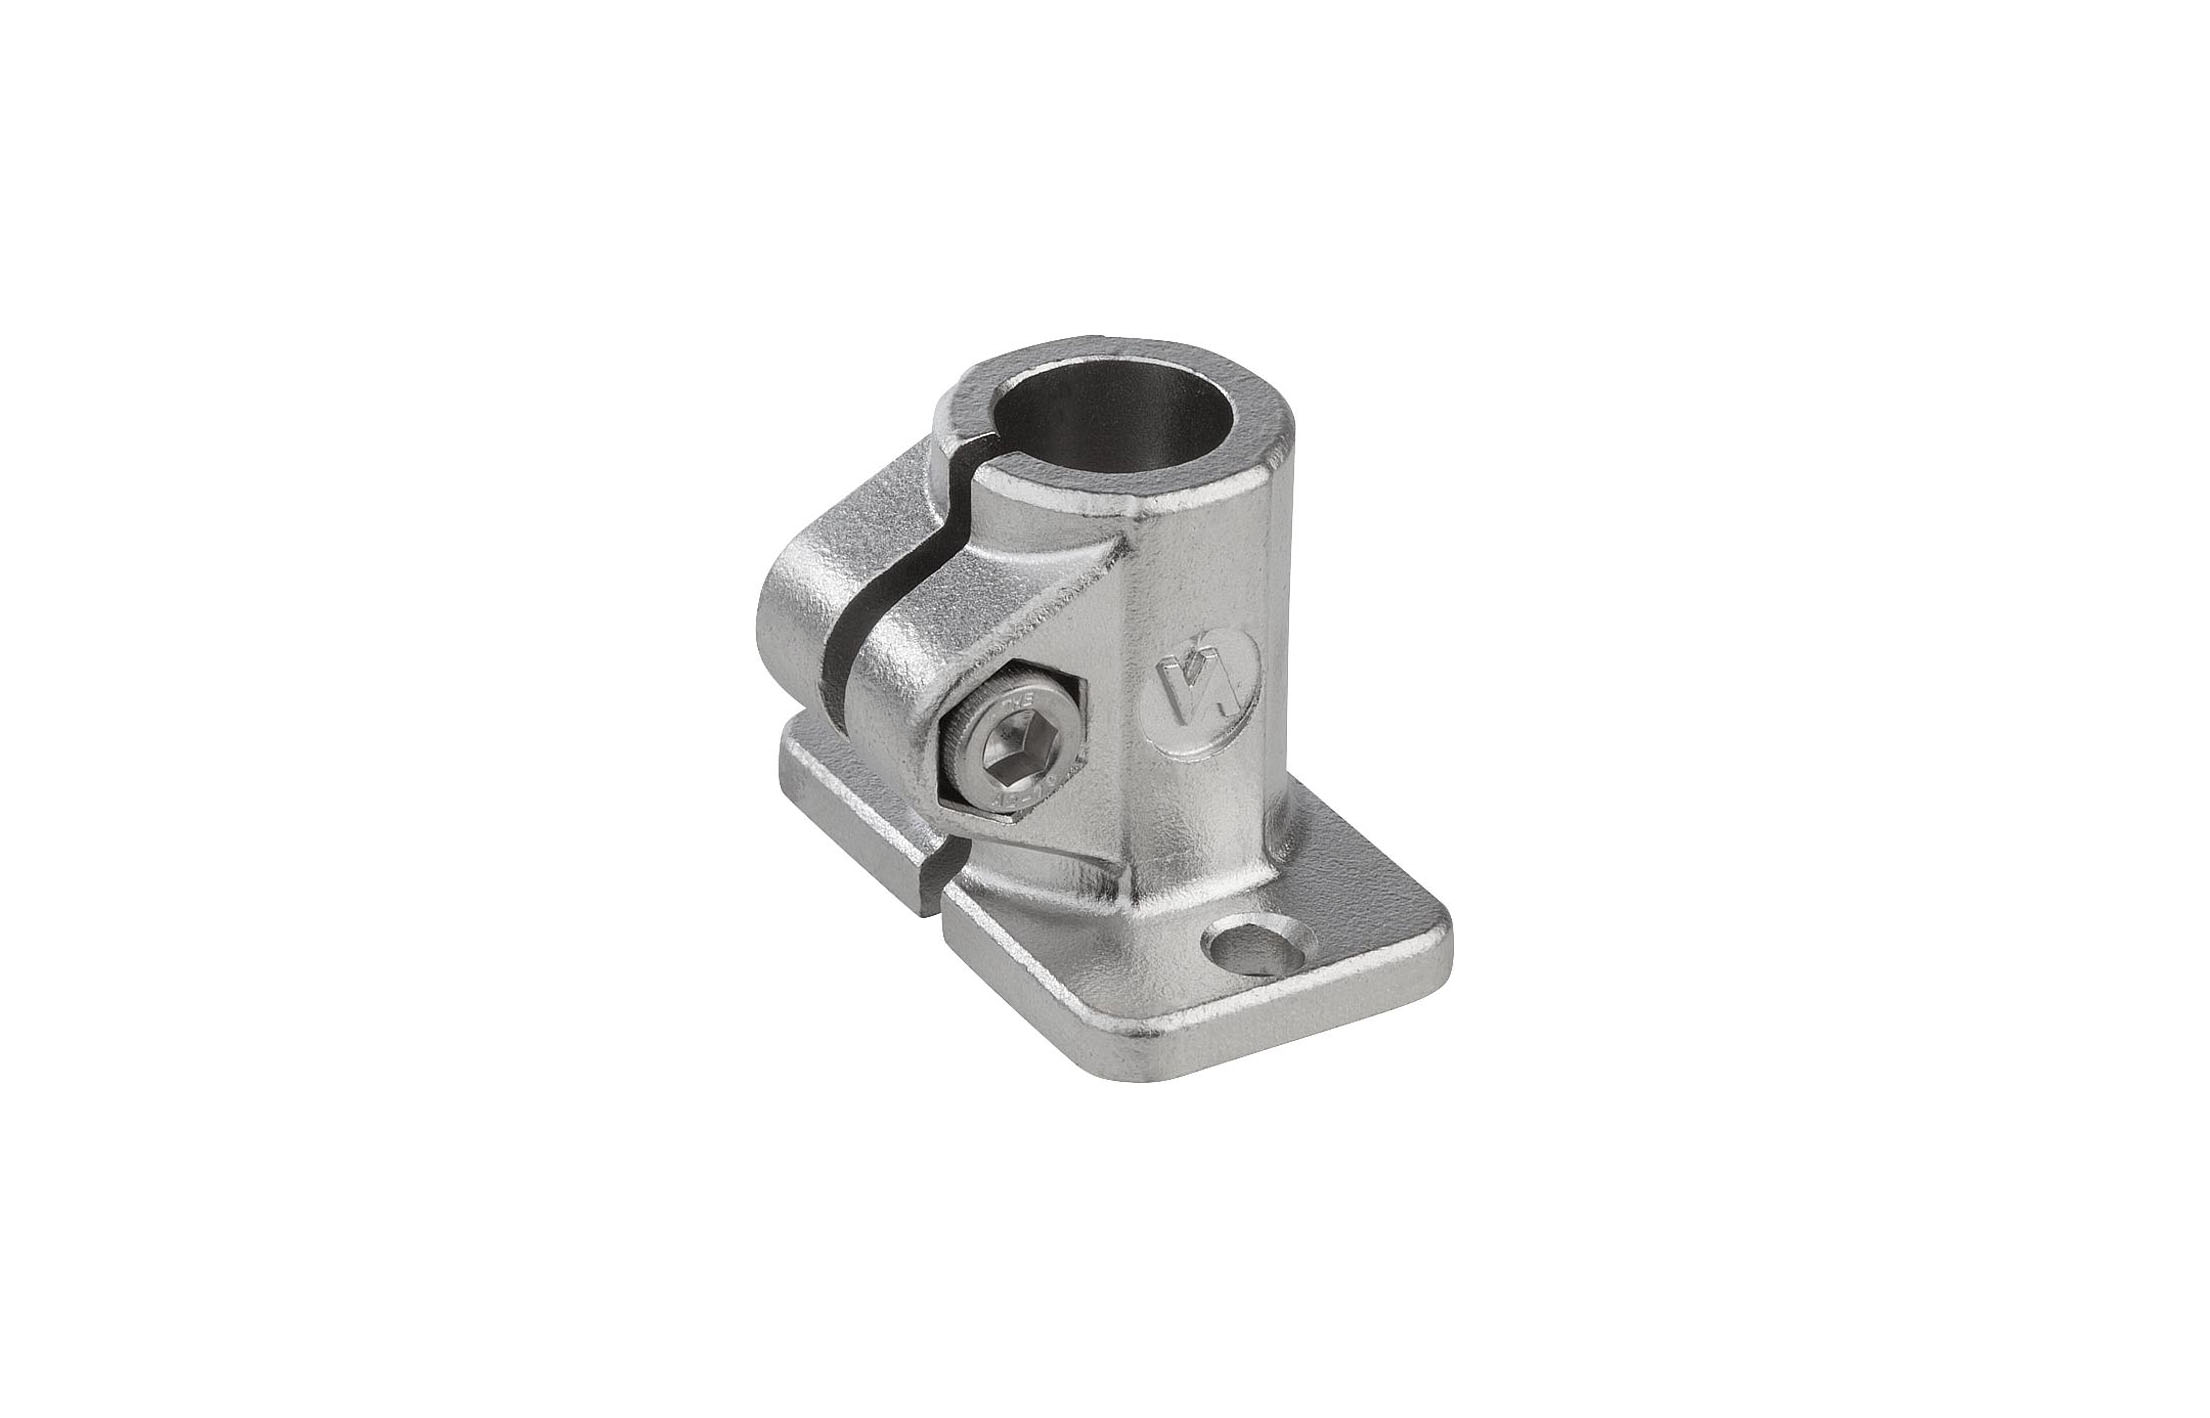 K0477_Tube clamps base, stainless steel